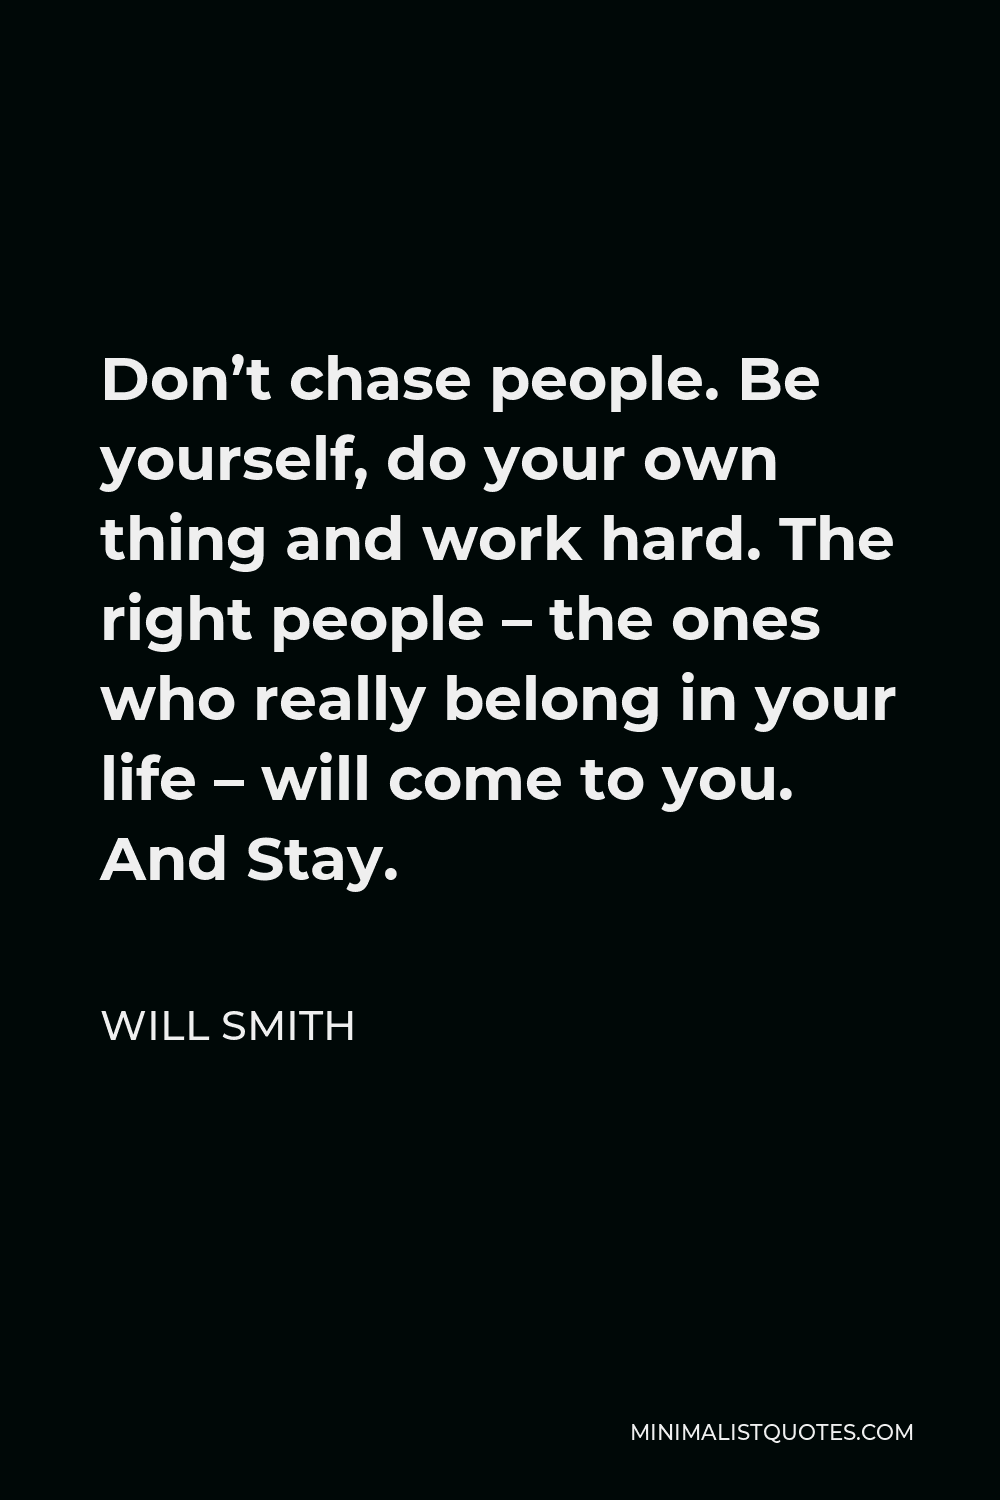 Will Smith Quote Don T Chase People Be Yourself Do Your Own Thing And Work Hard The Right People The Ones Who Really Belong In Your Life Will Come To You